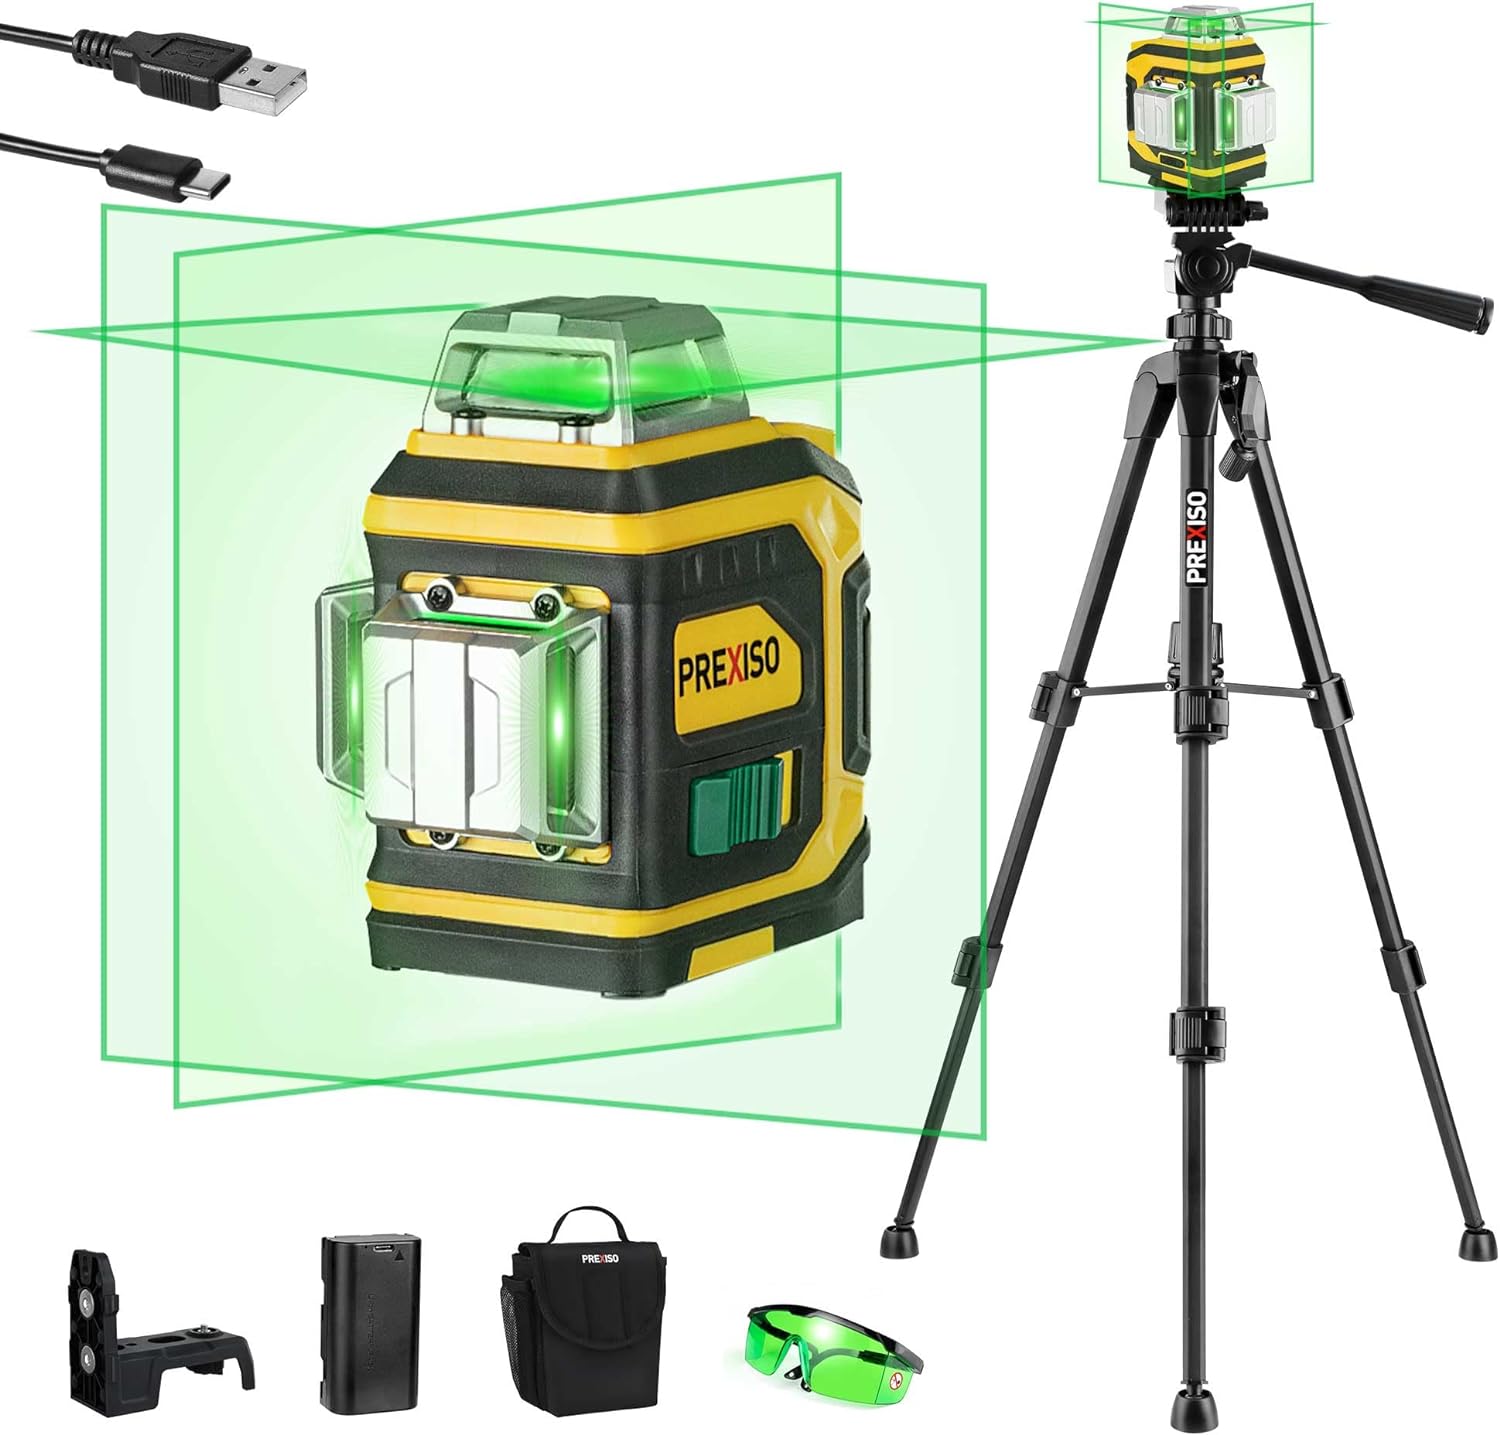 PREXISO Rechargeable 360° Self Leveling Green Laser Level with Tripod